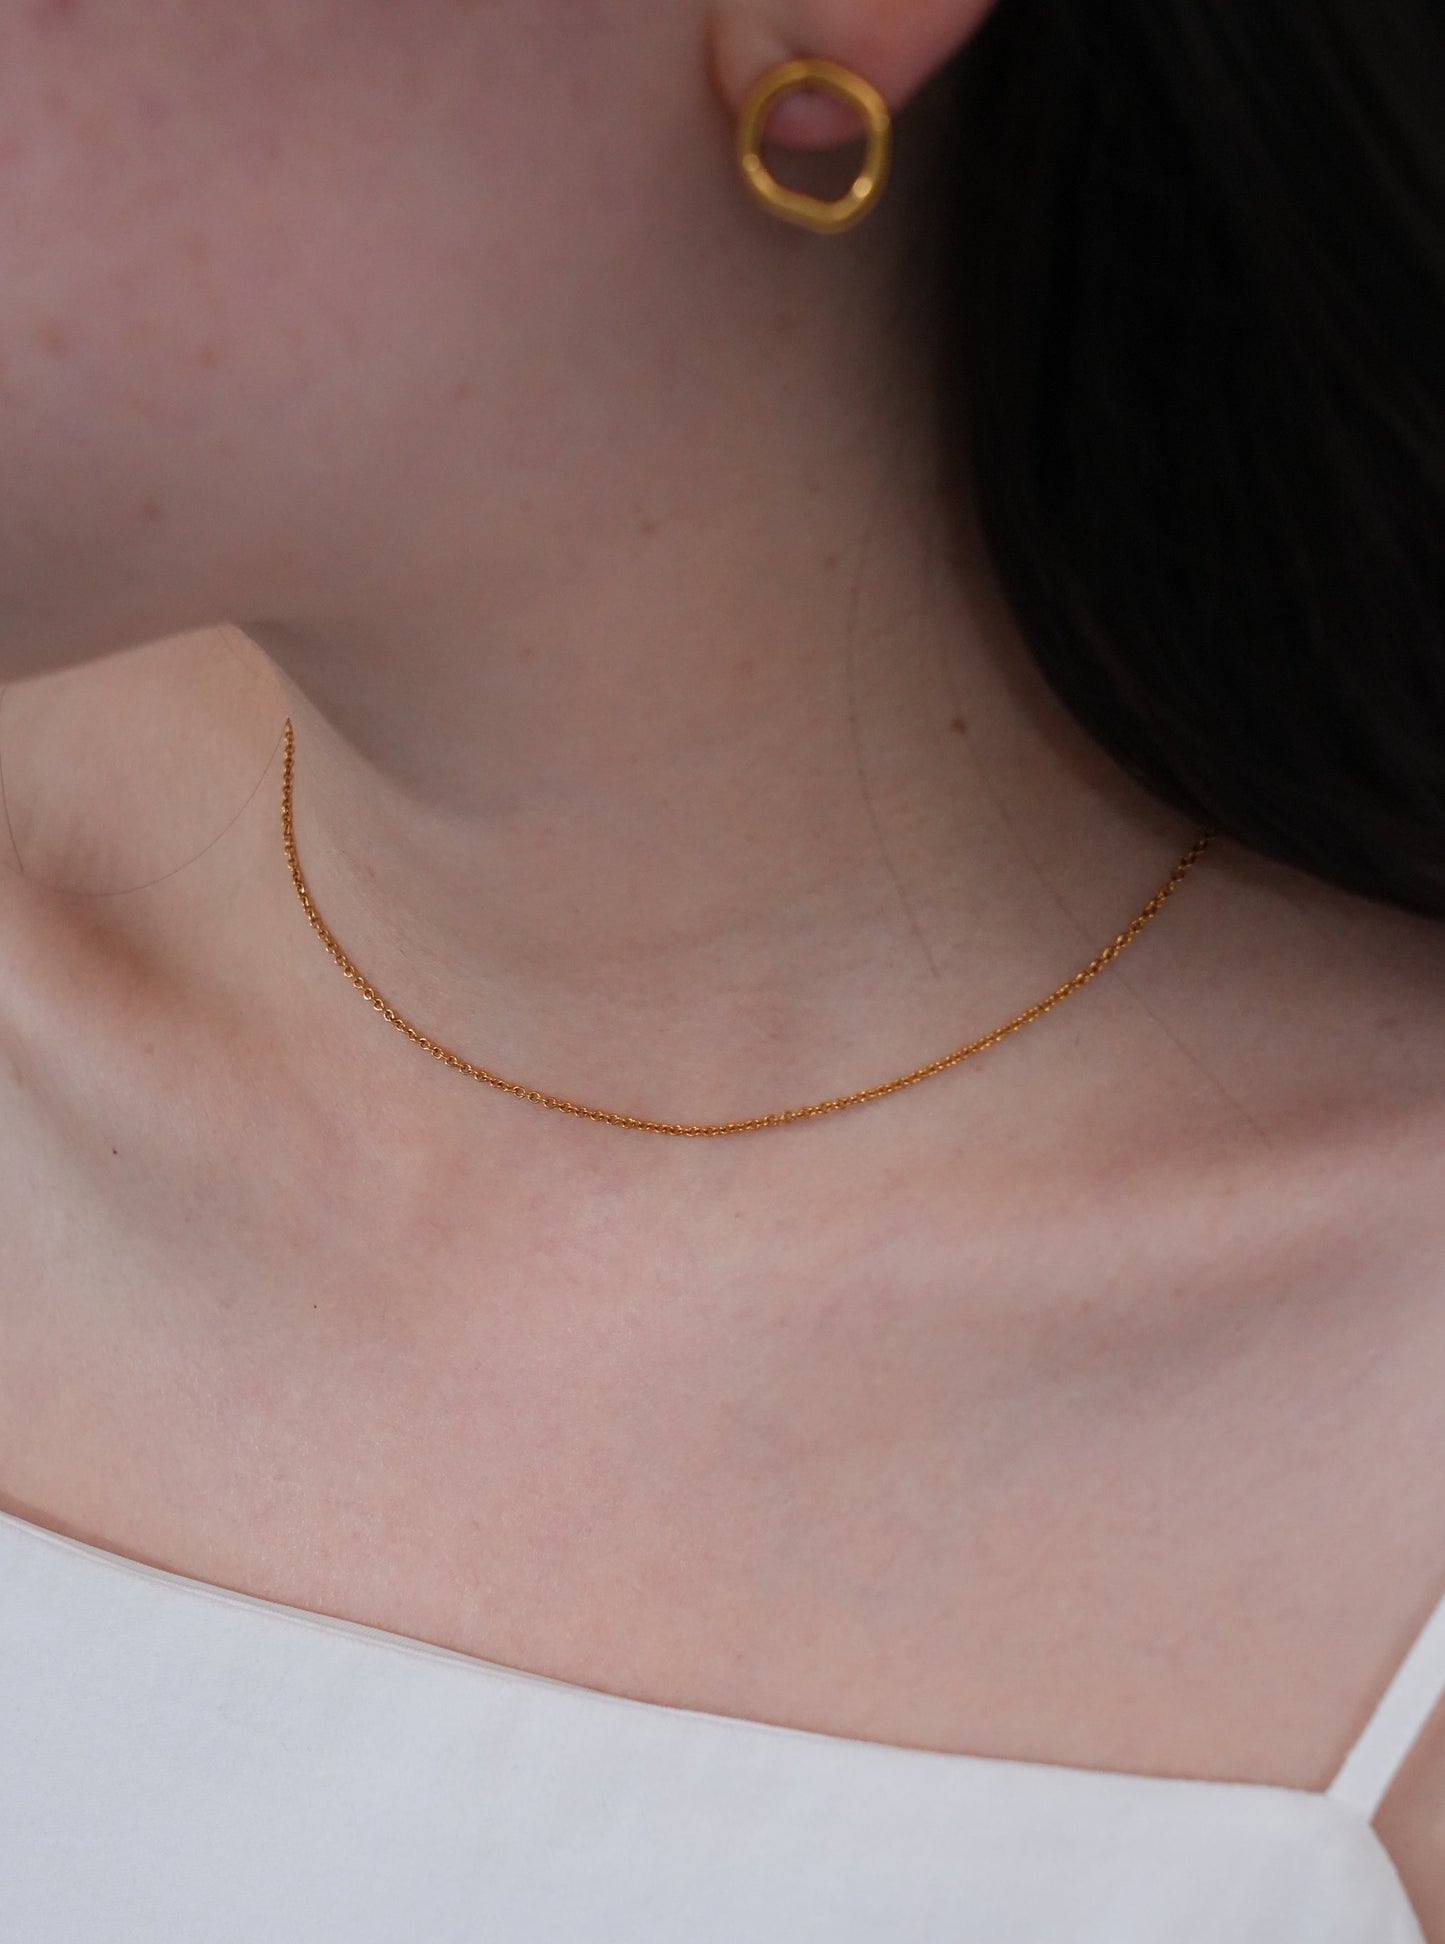 Rond chain necklace / 316L(金属アレルギー対応)